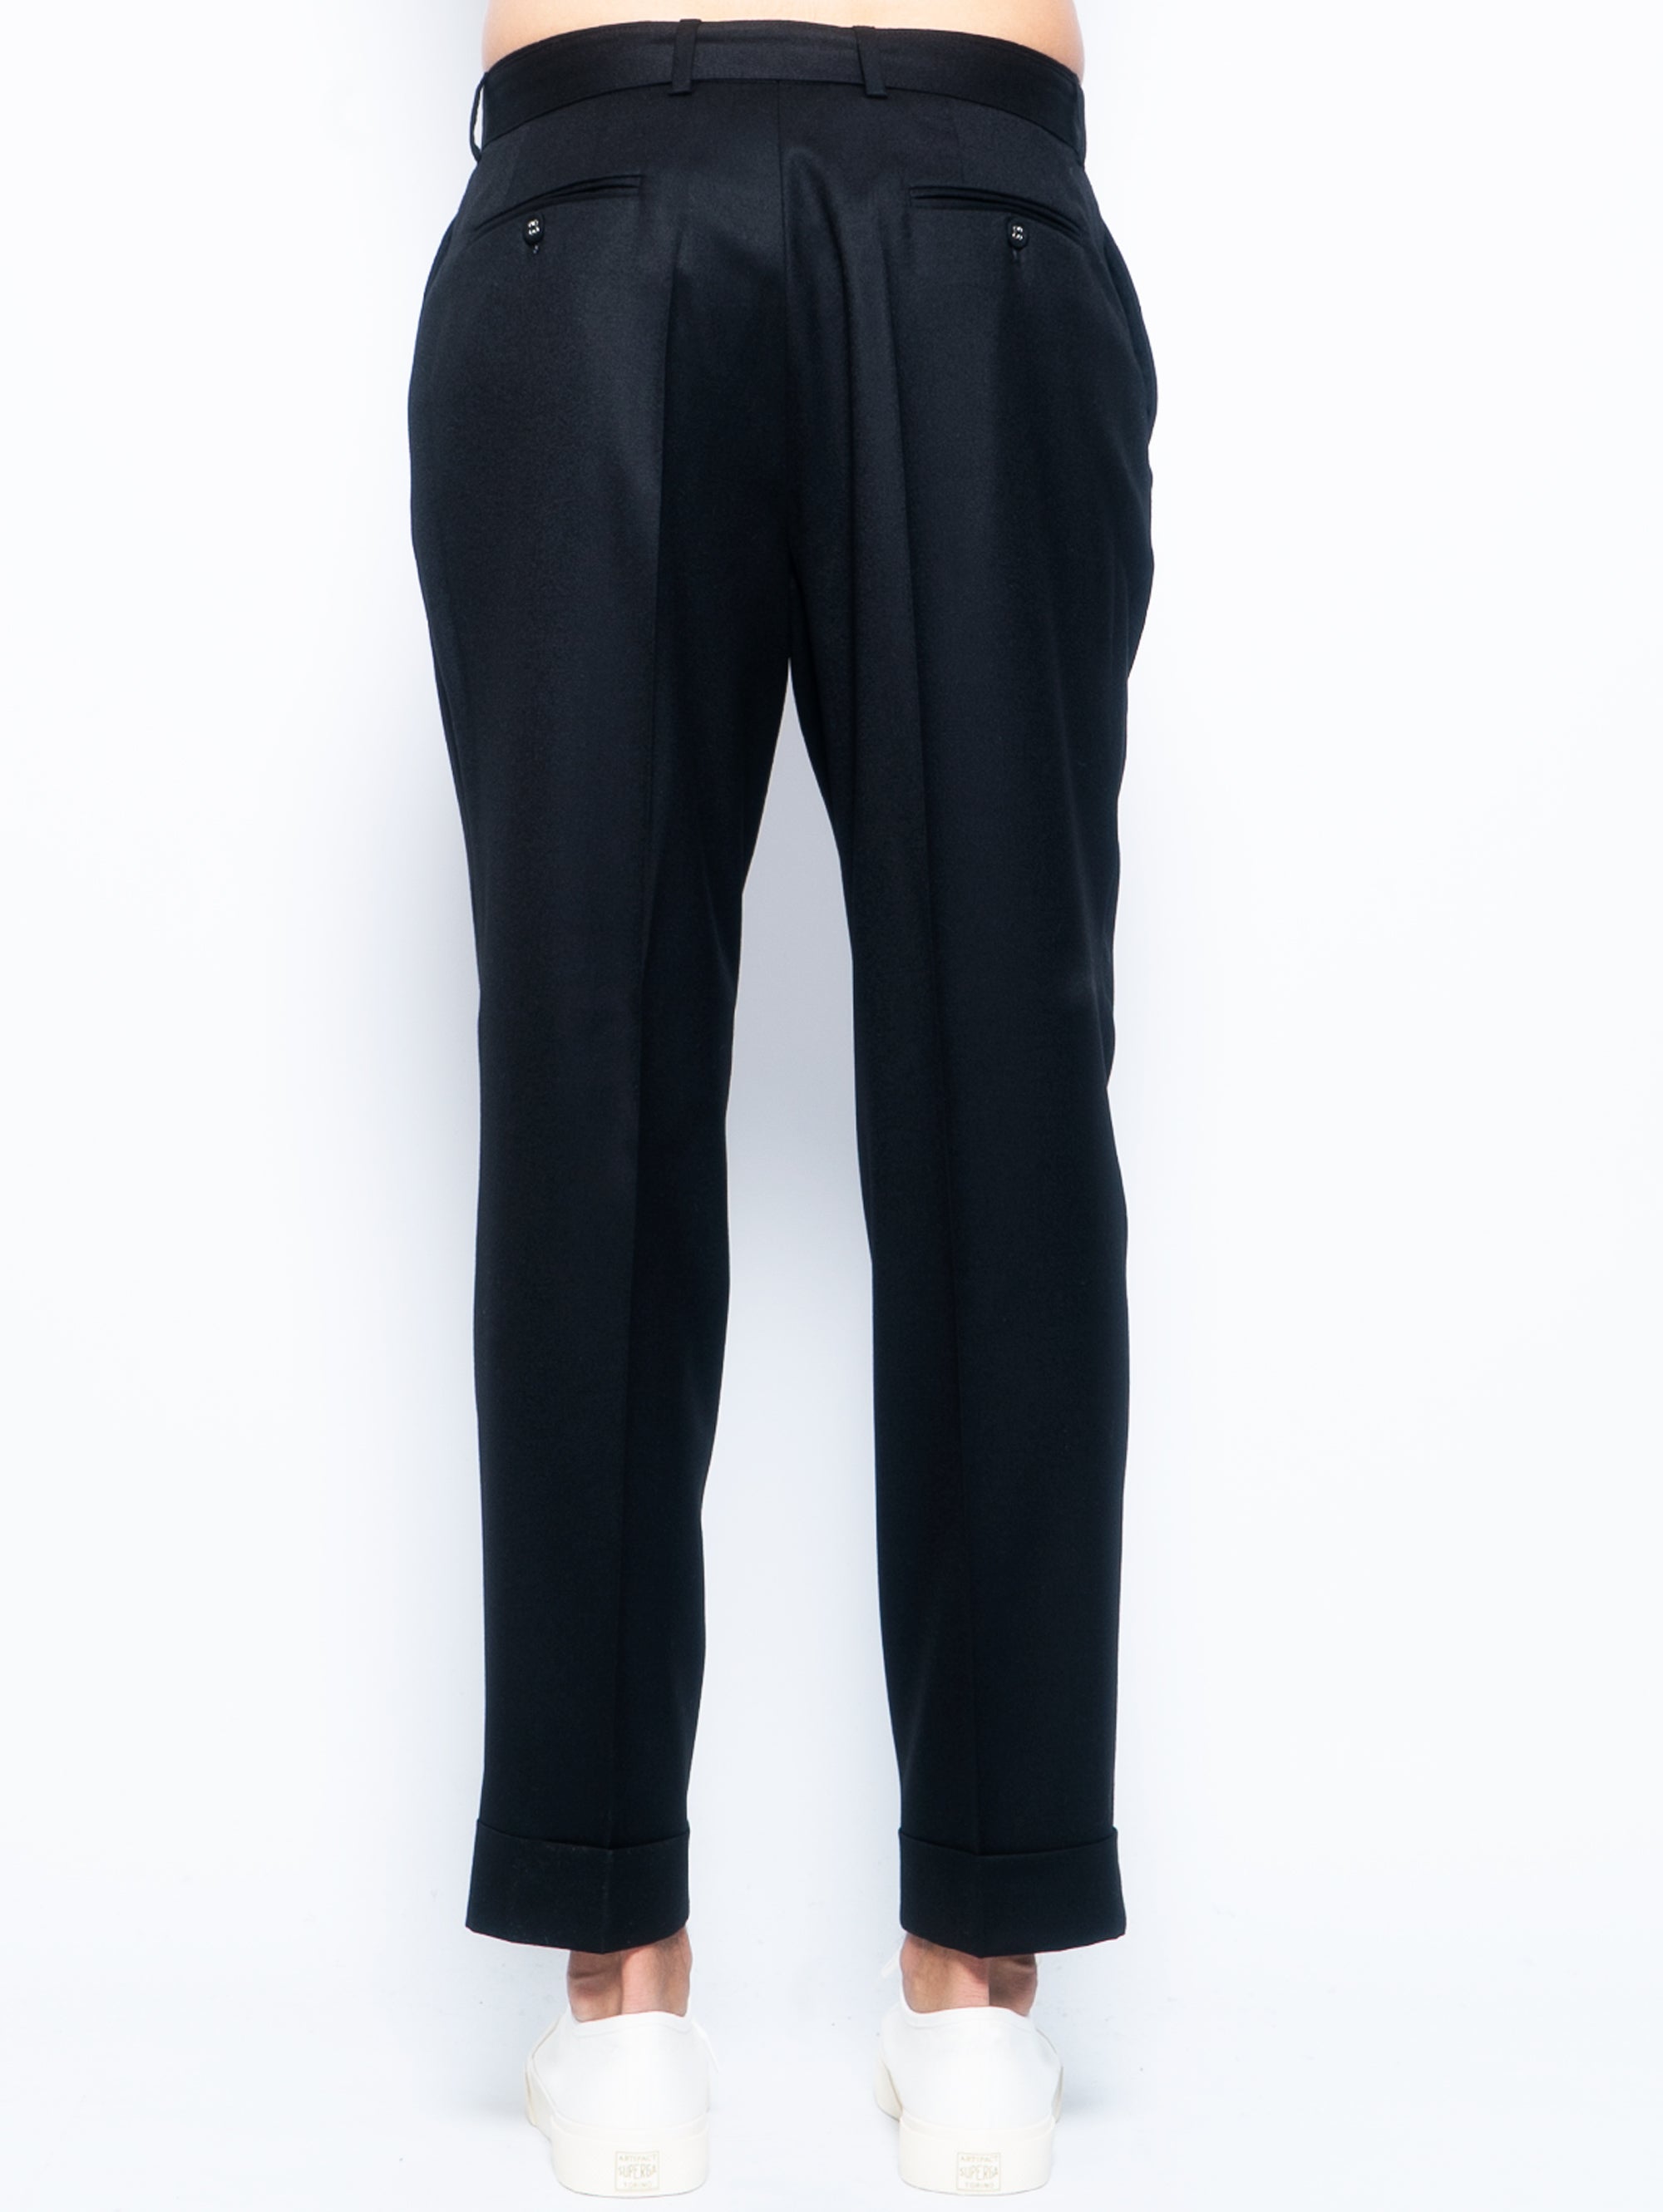 Black Cool Wool Trousers with Belt